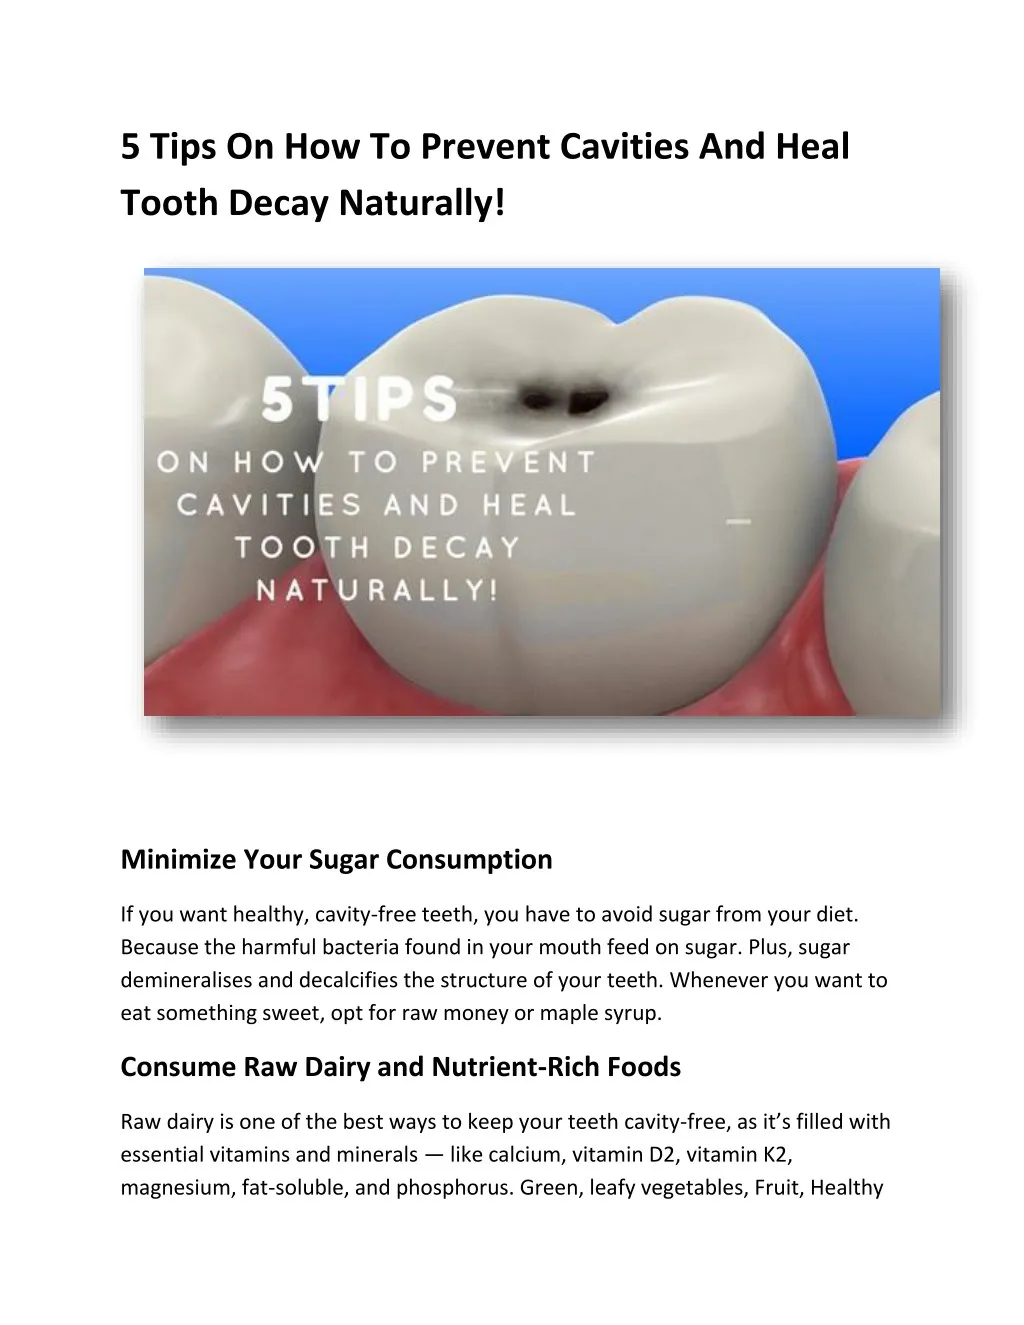 5 tips on how to prevent cavities and heal tooth